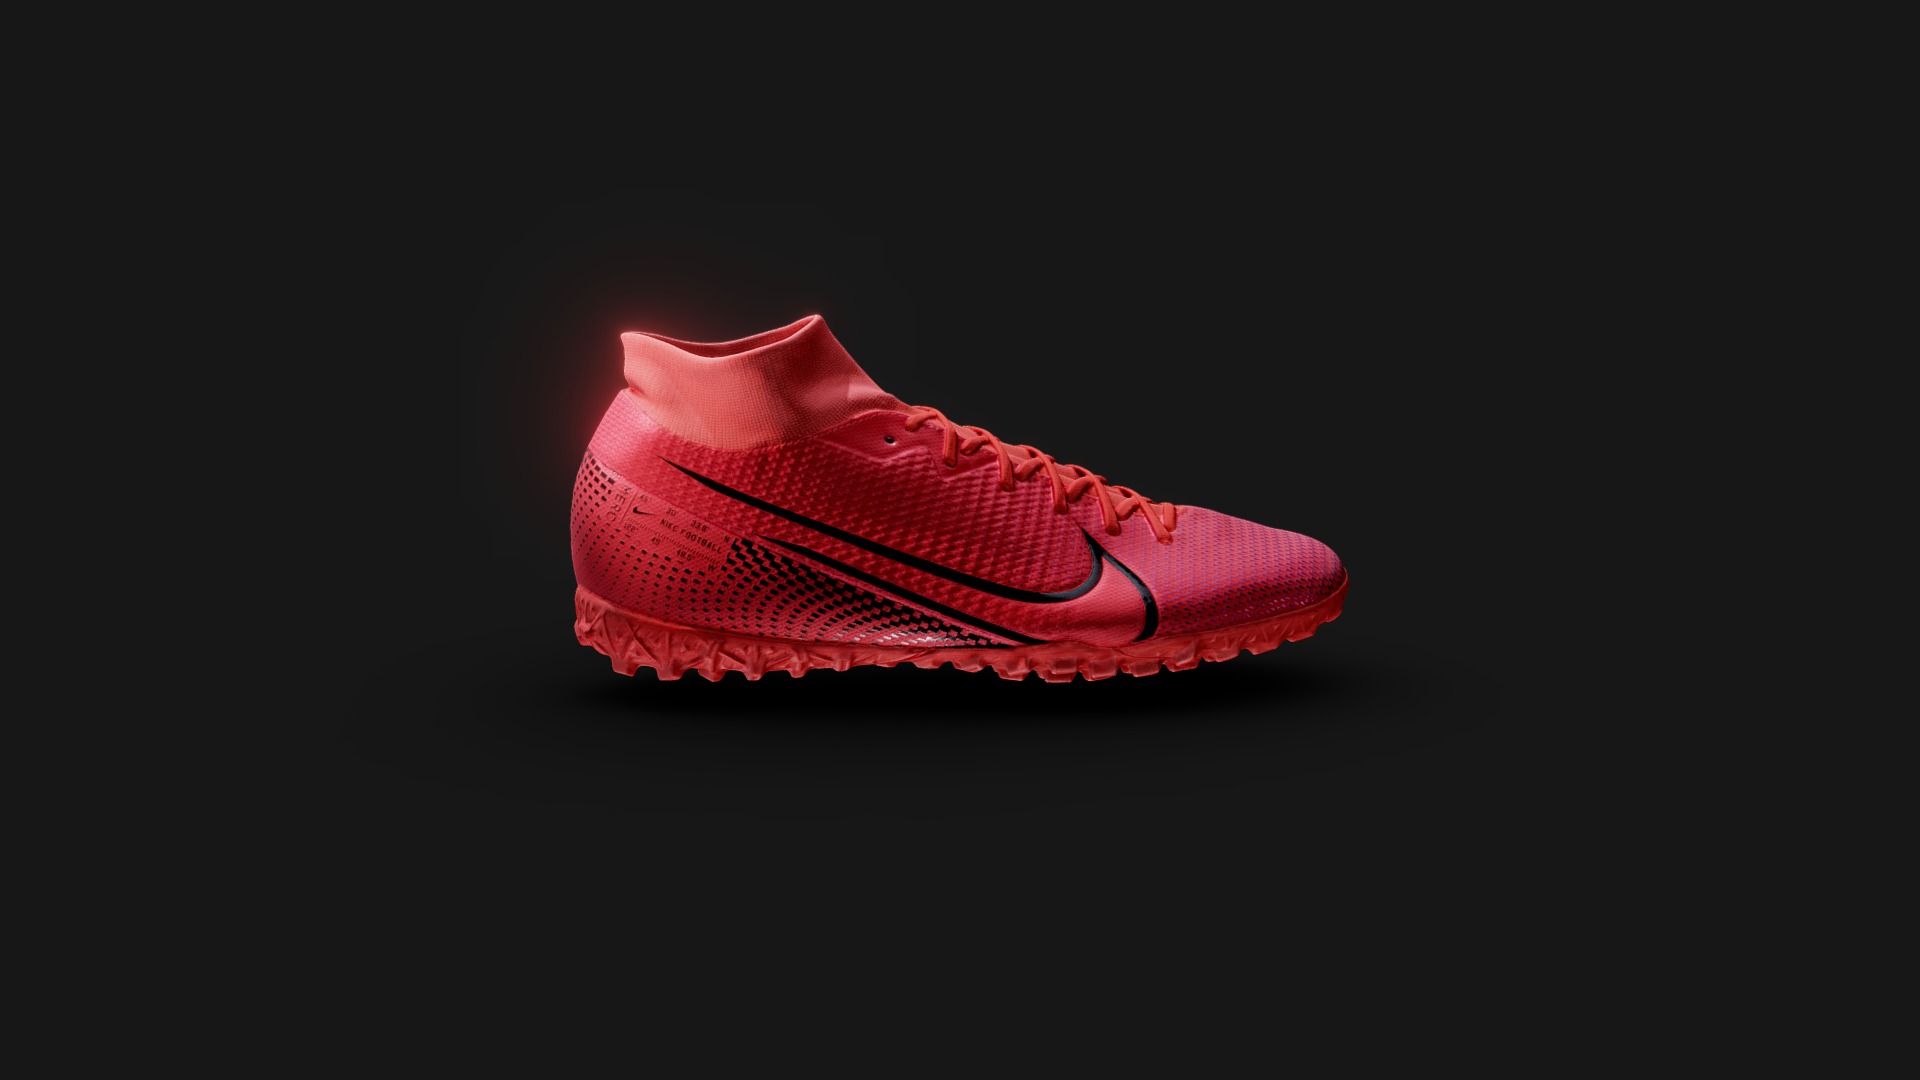 3D model Nike Mercurial Superfly 7 - This is a 3D model of the Nike Mercurial Superfly 7. The 3D model is about a red shoe on a black background.